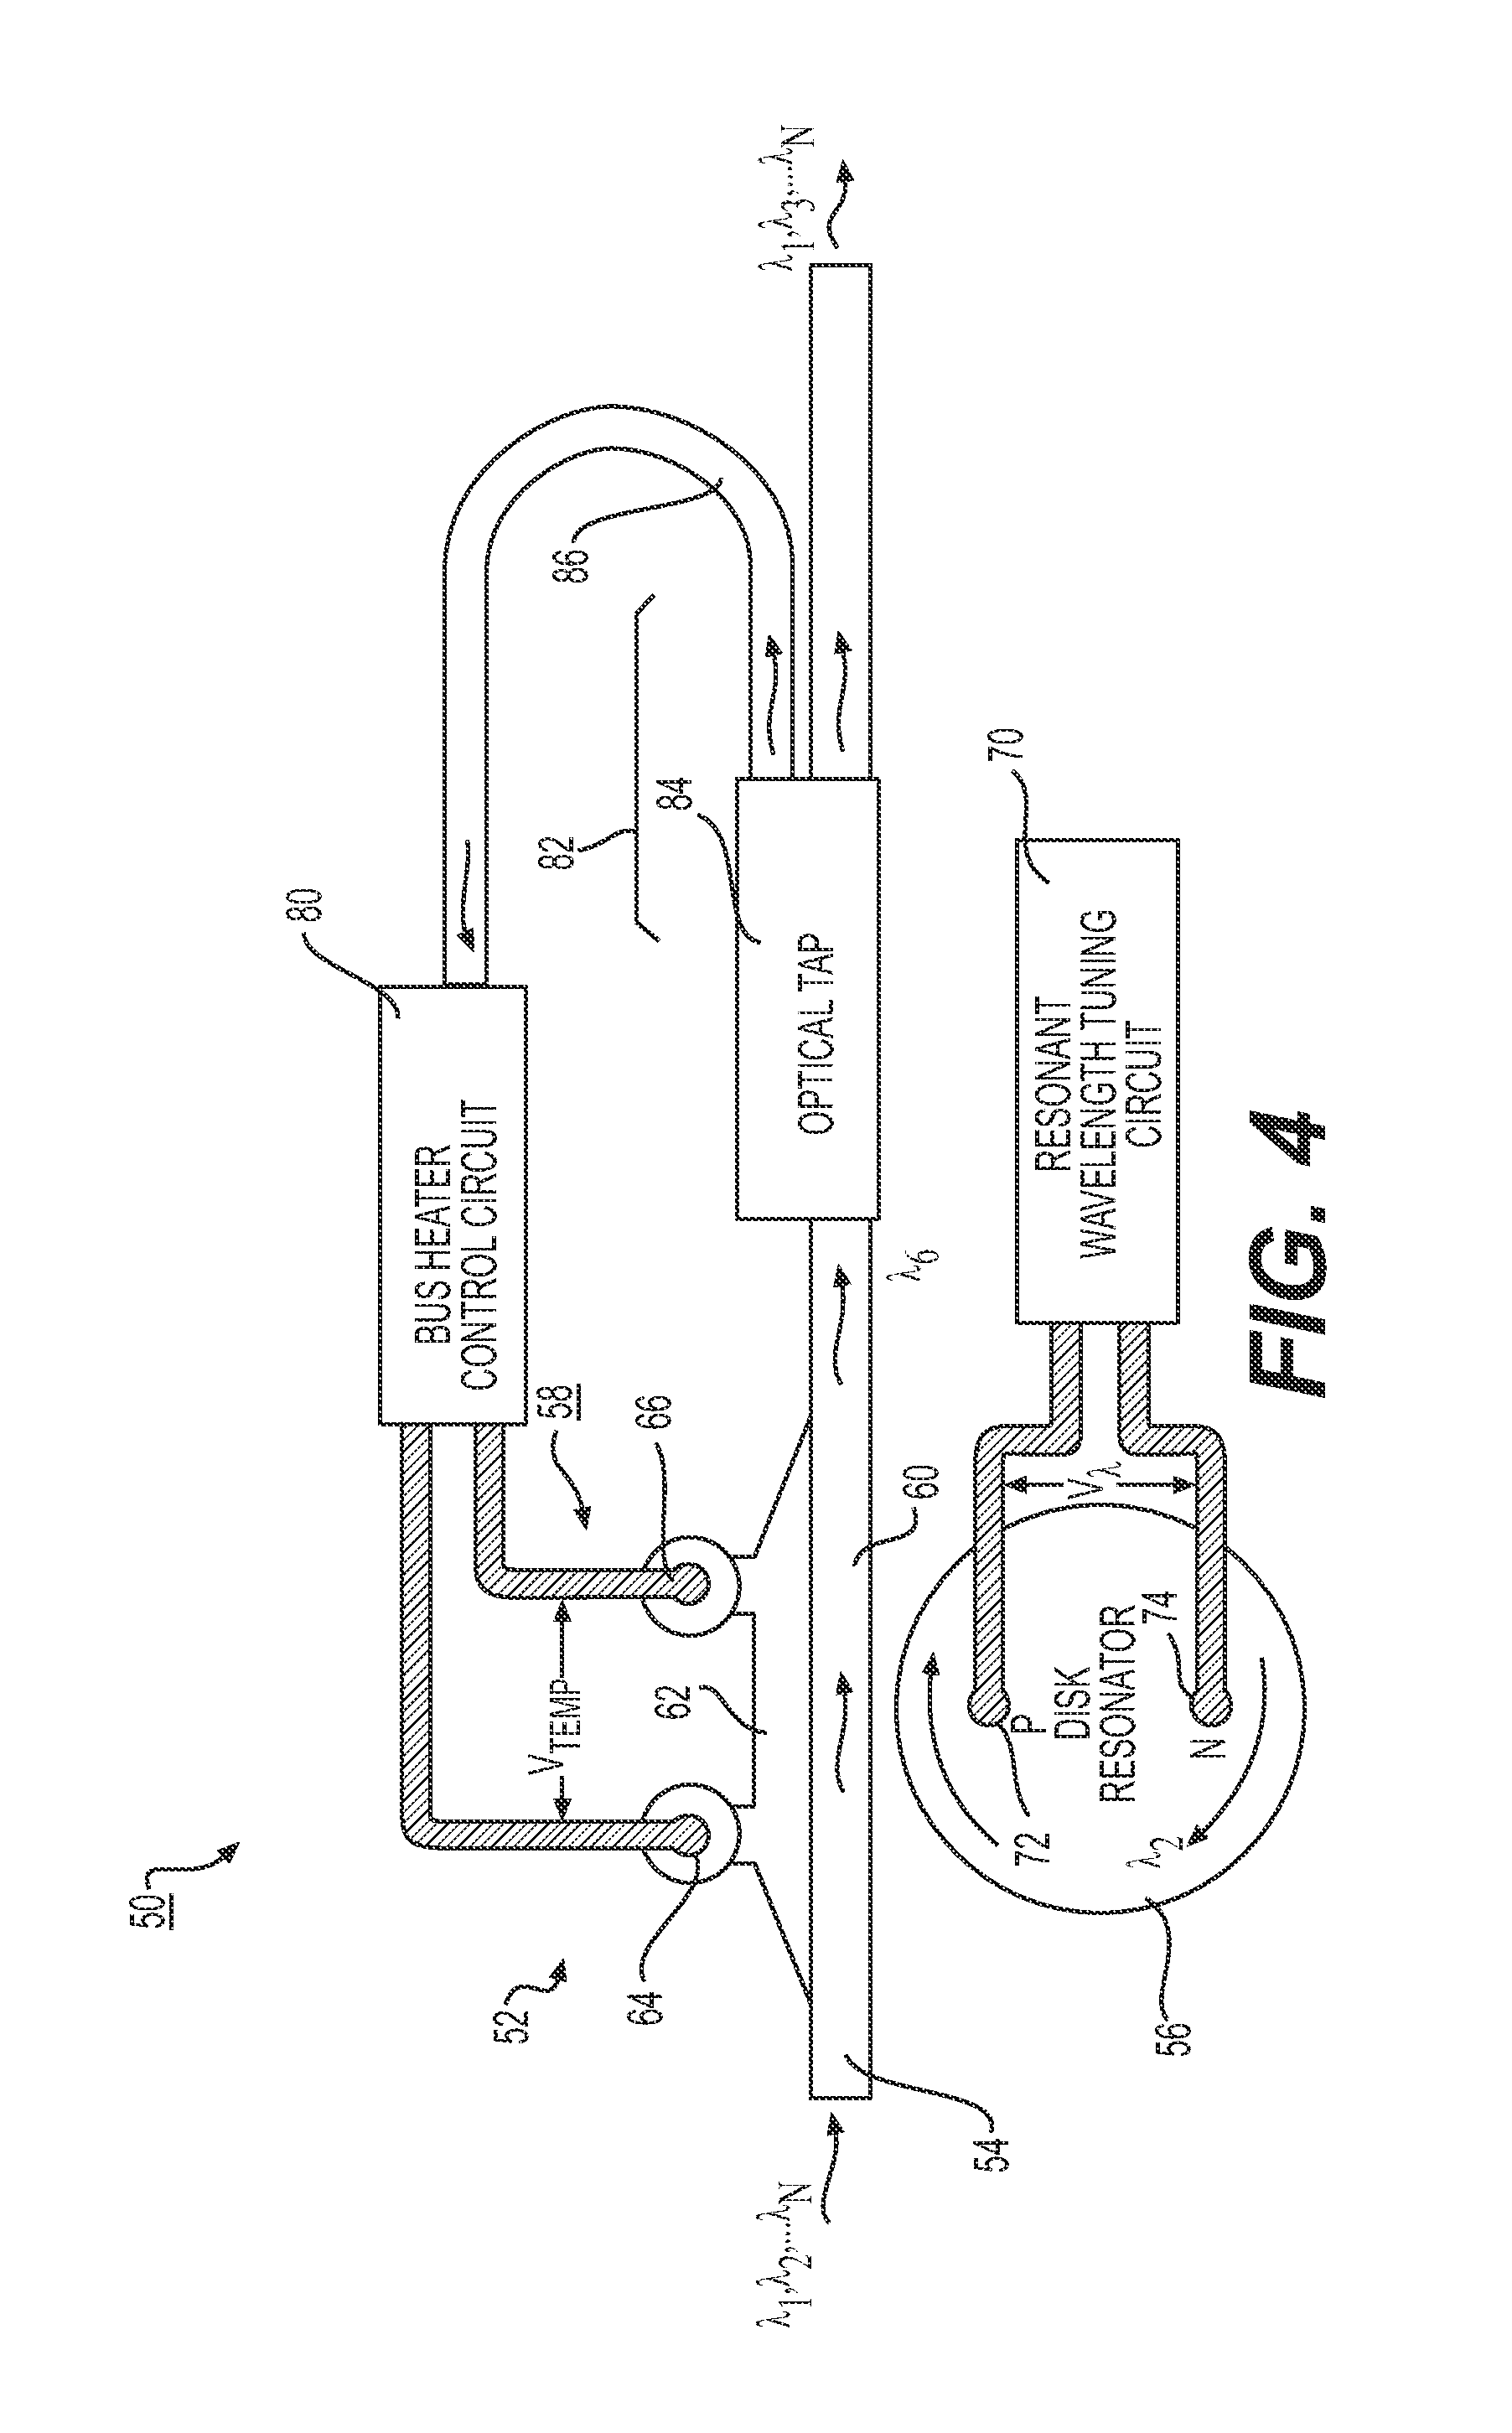 Methods and devices for maintaining a resonant wavelength of a photonic microresonator